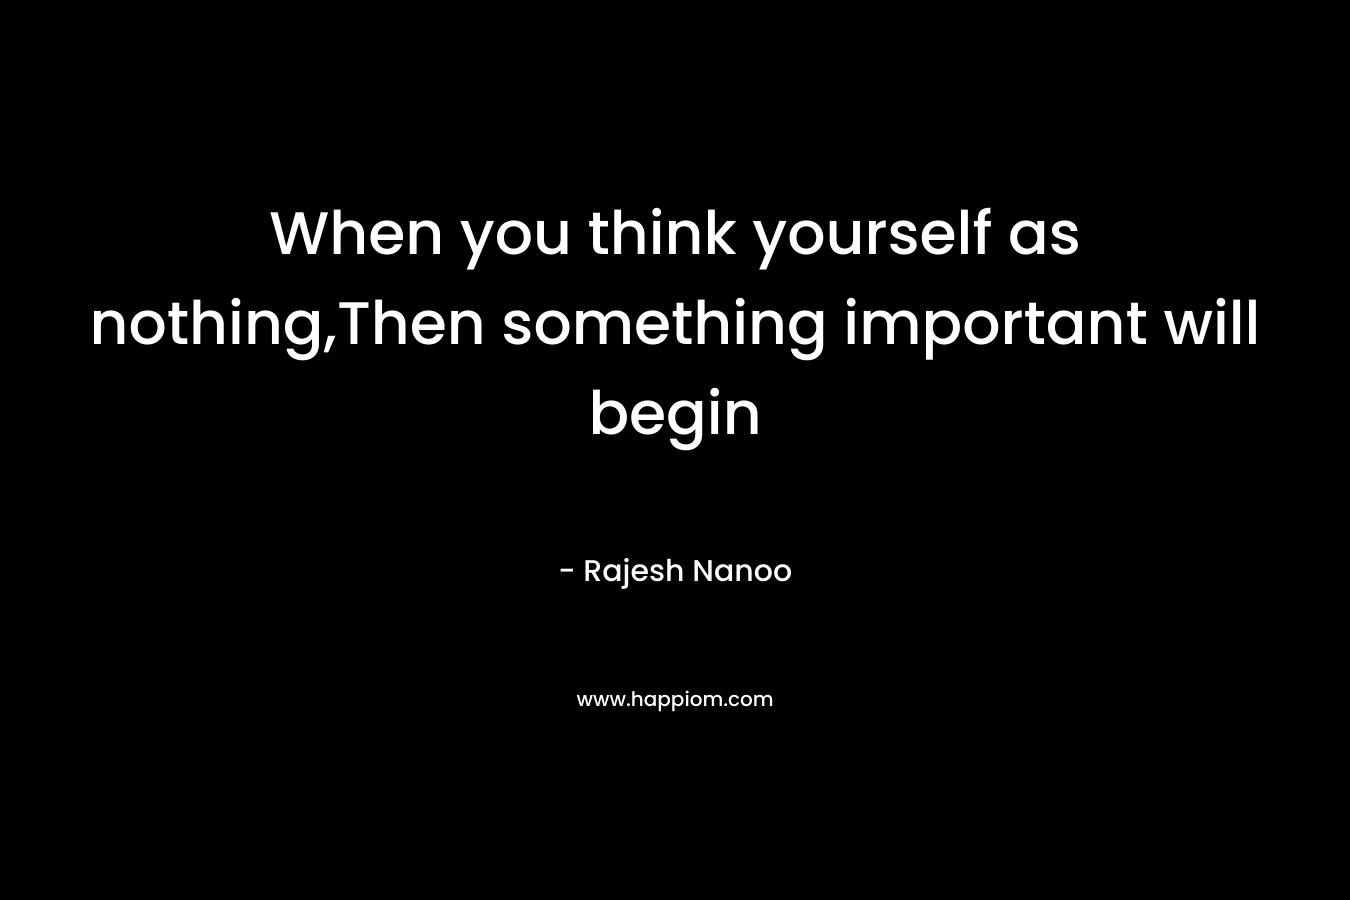 When you think yourself as nothing,Then something important will begin